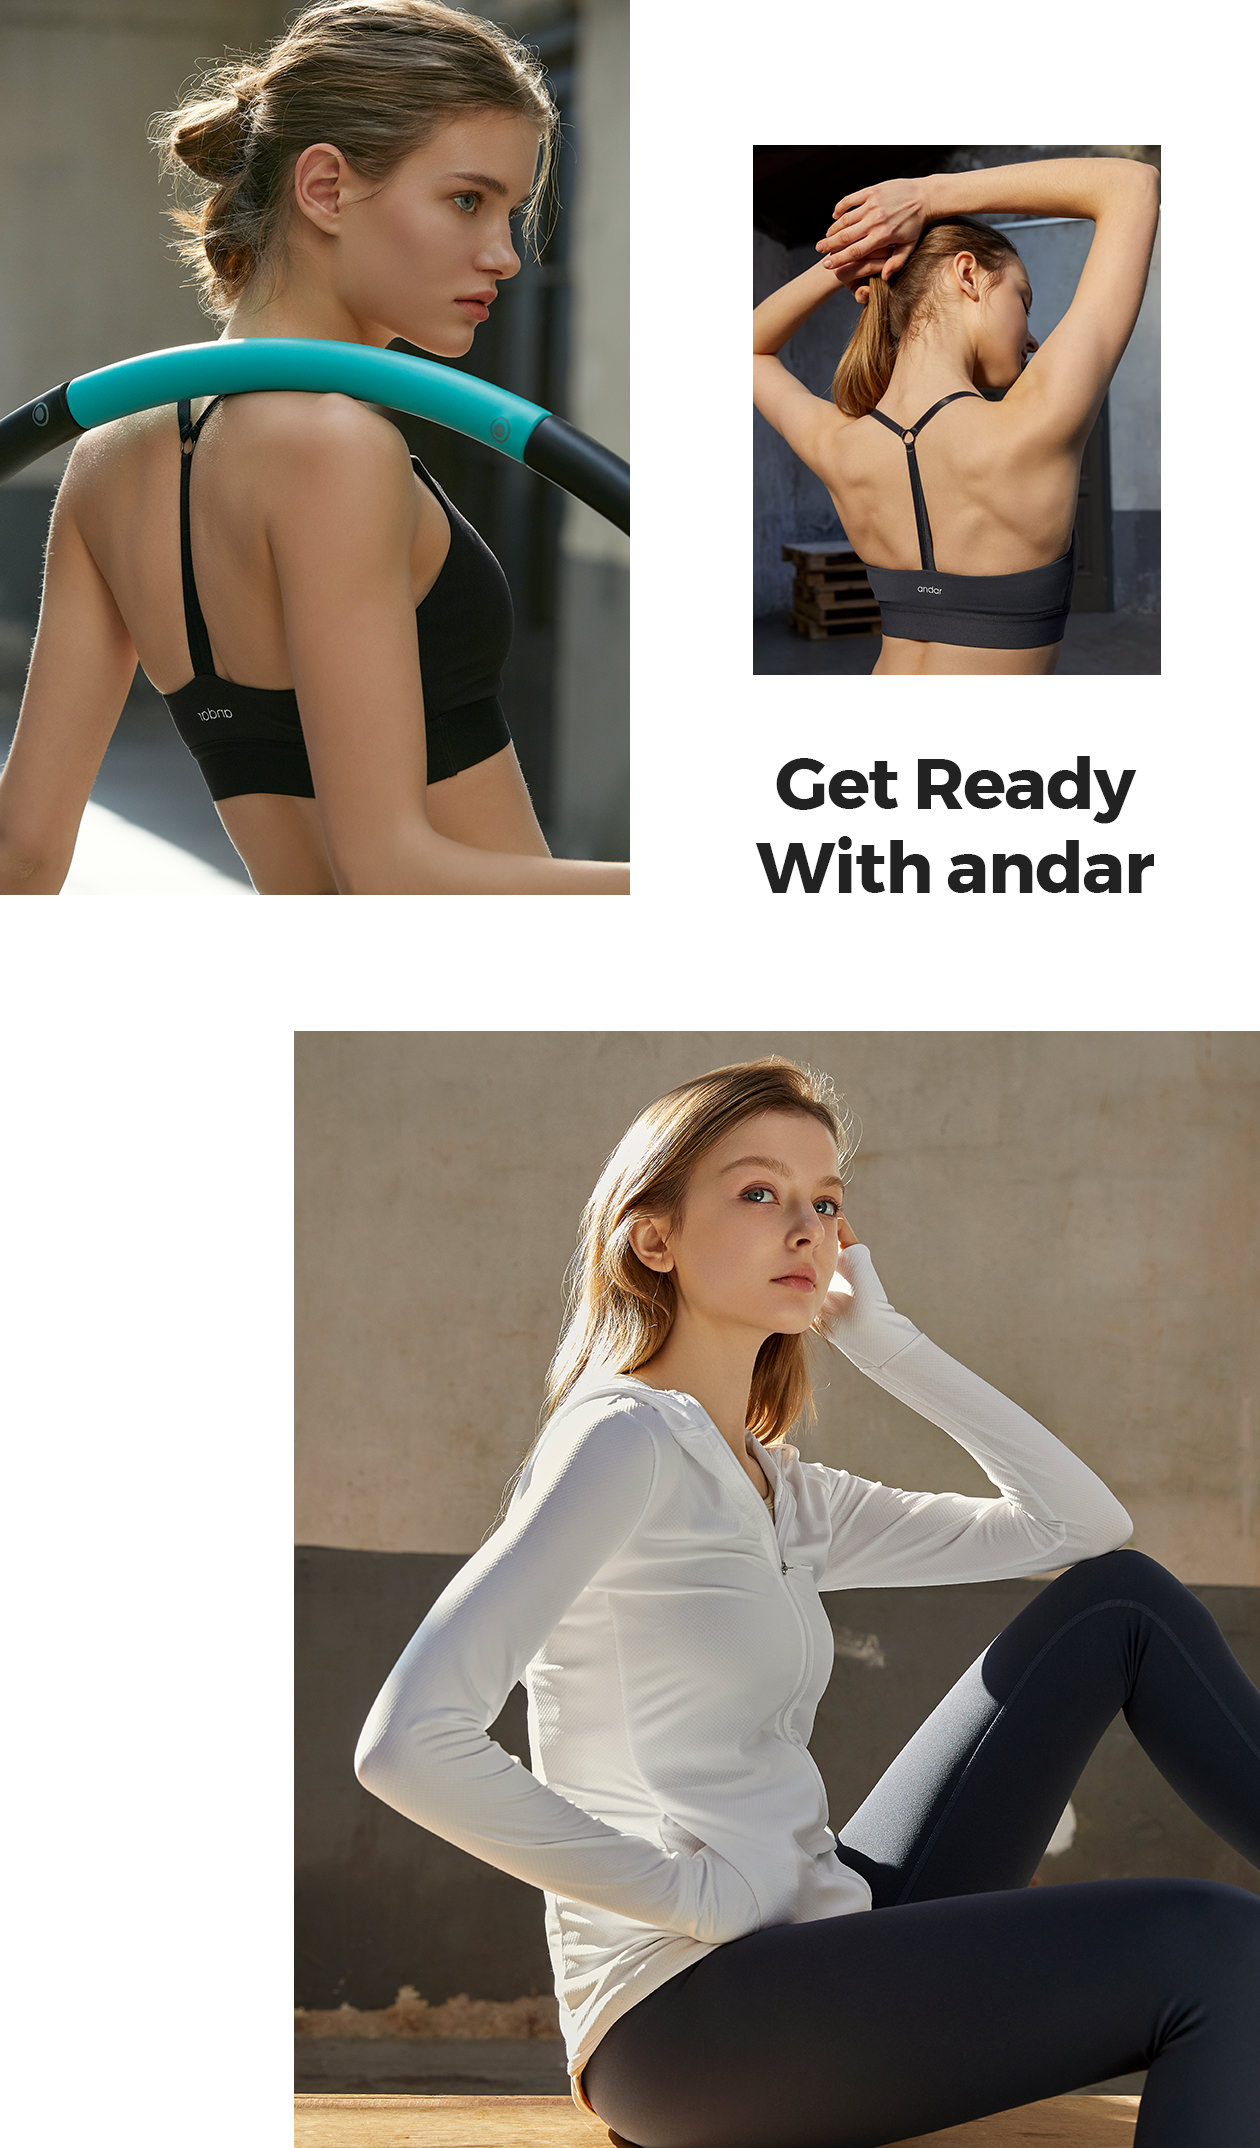 GET READY WITH andar